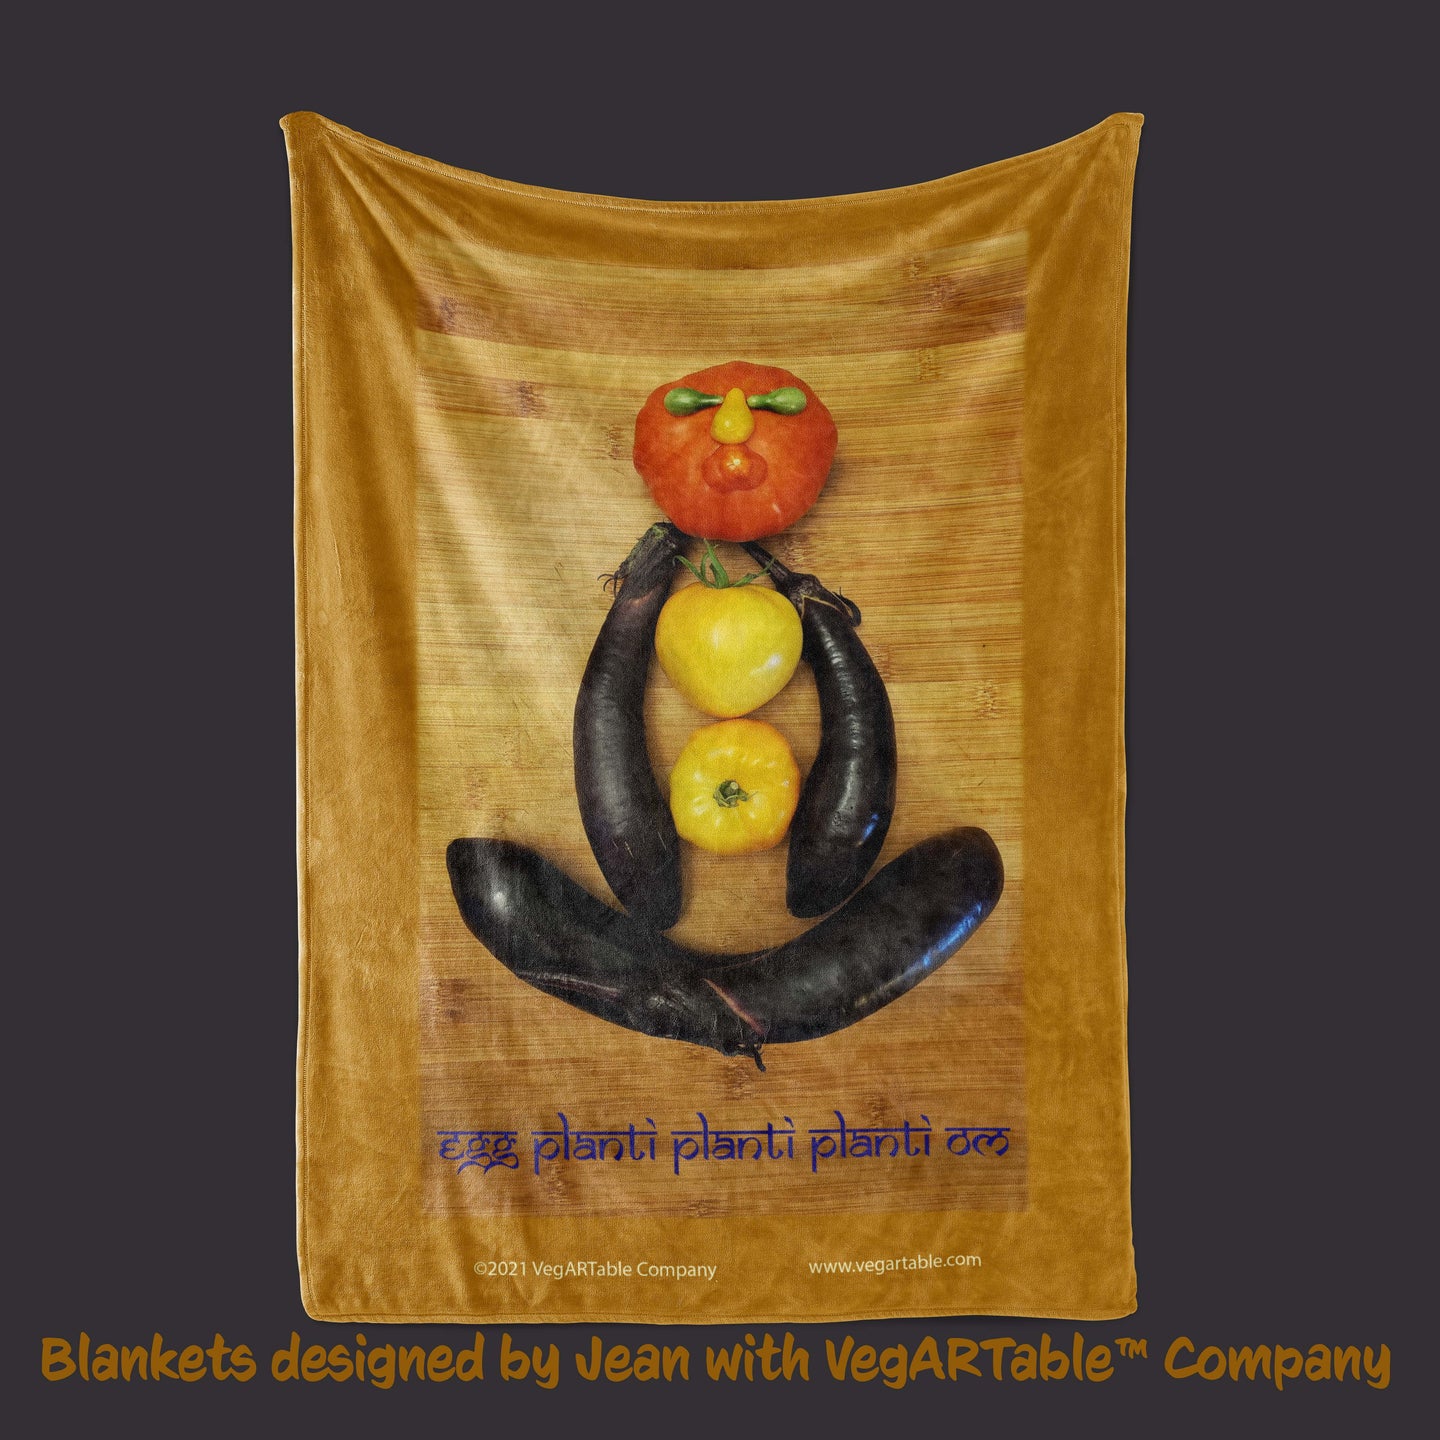 Egg Planti Blanket designed by Jean with VegARTable™ Company